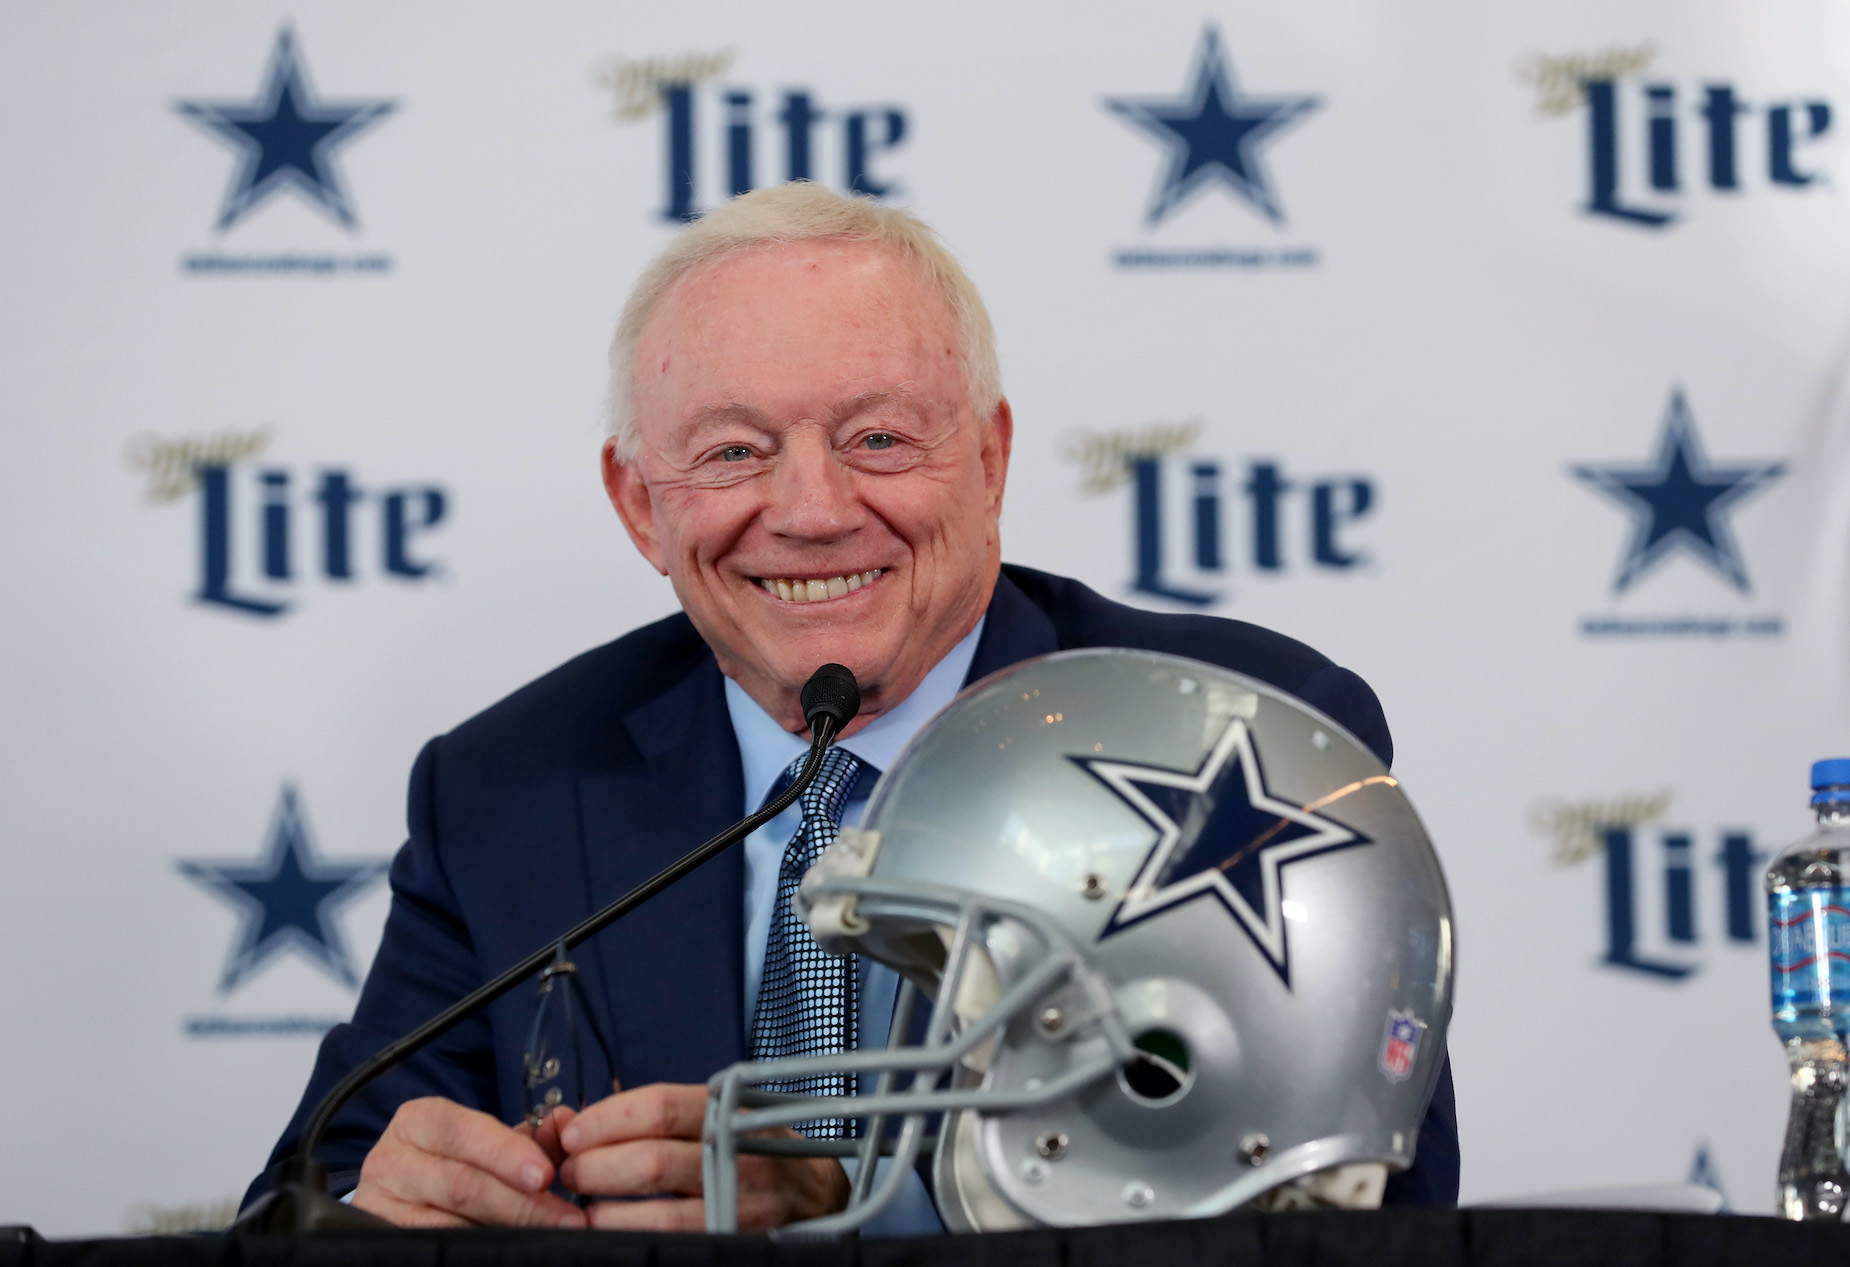 Dallas Cowboys owner Jerry Jones during a 2020 press conference.